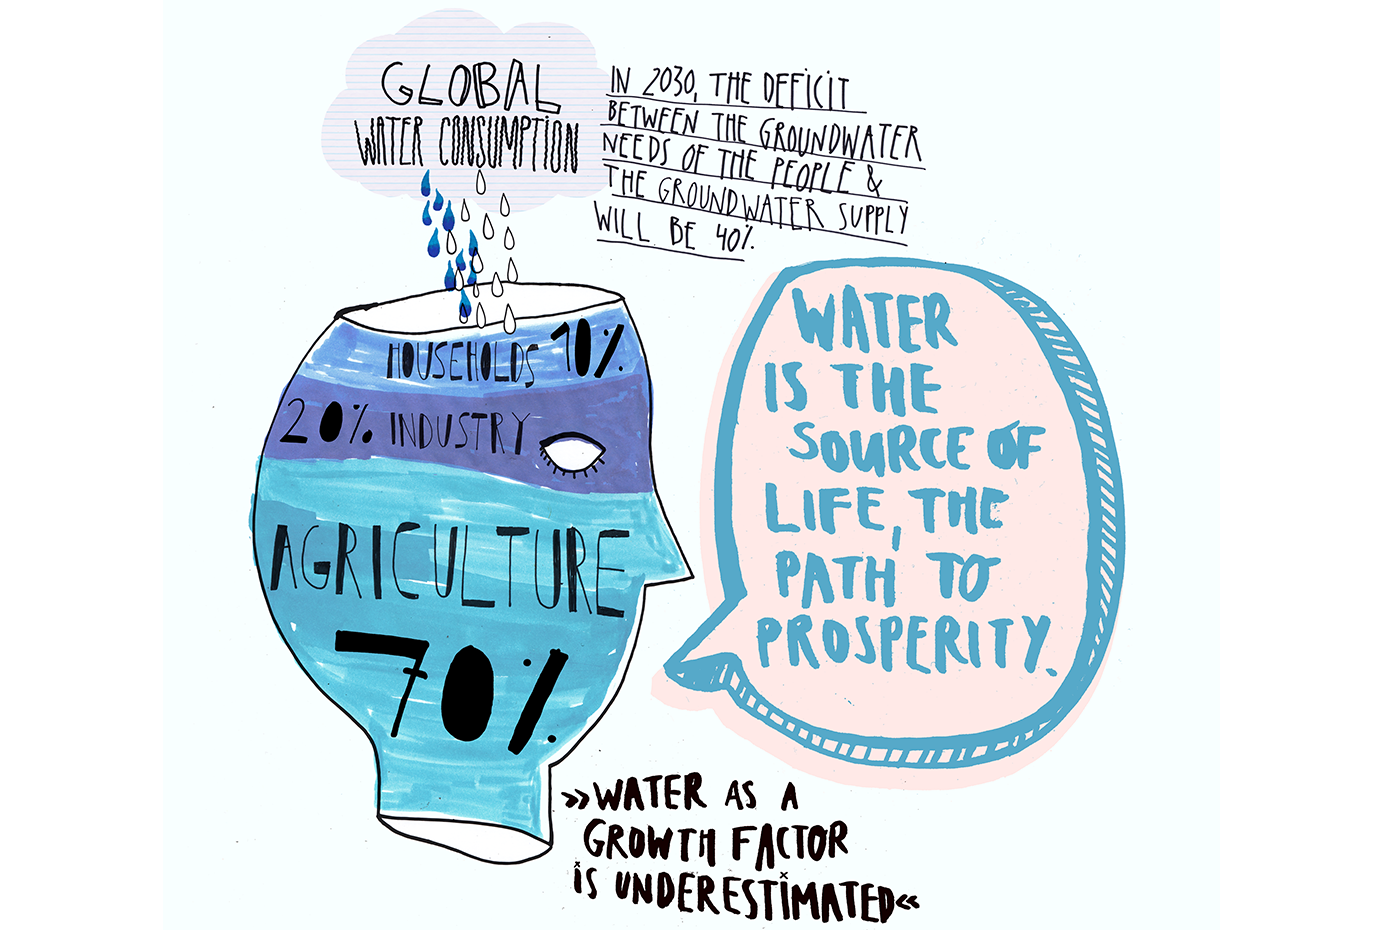 Global water consumption (Illustration)